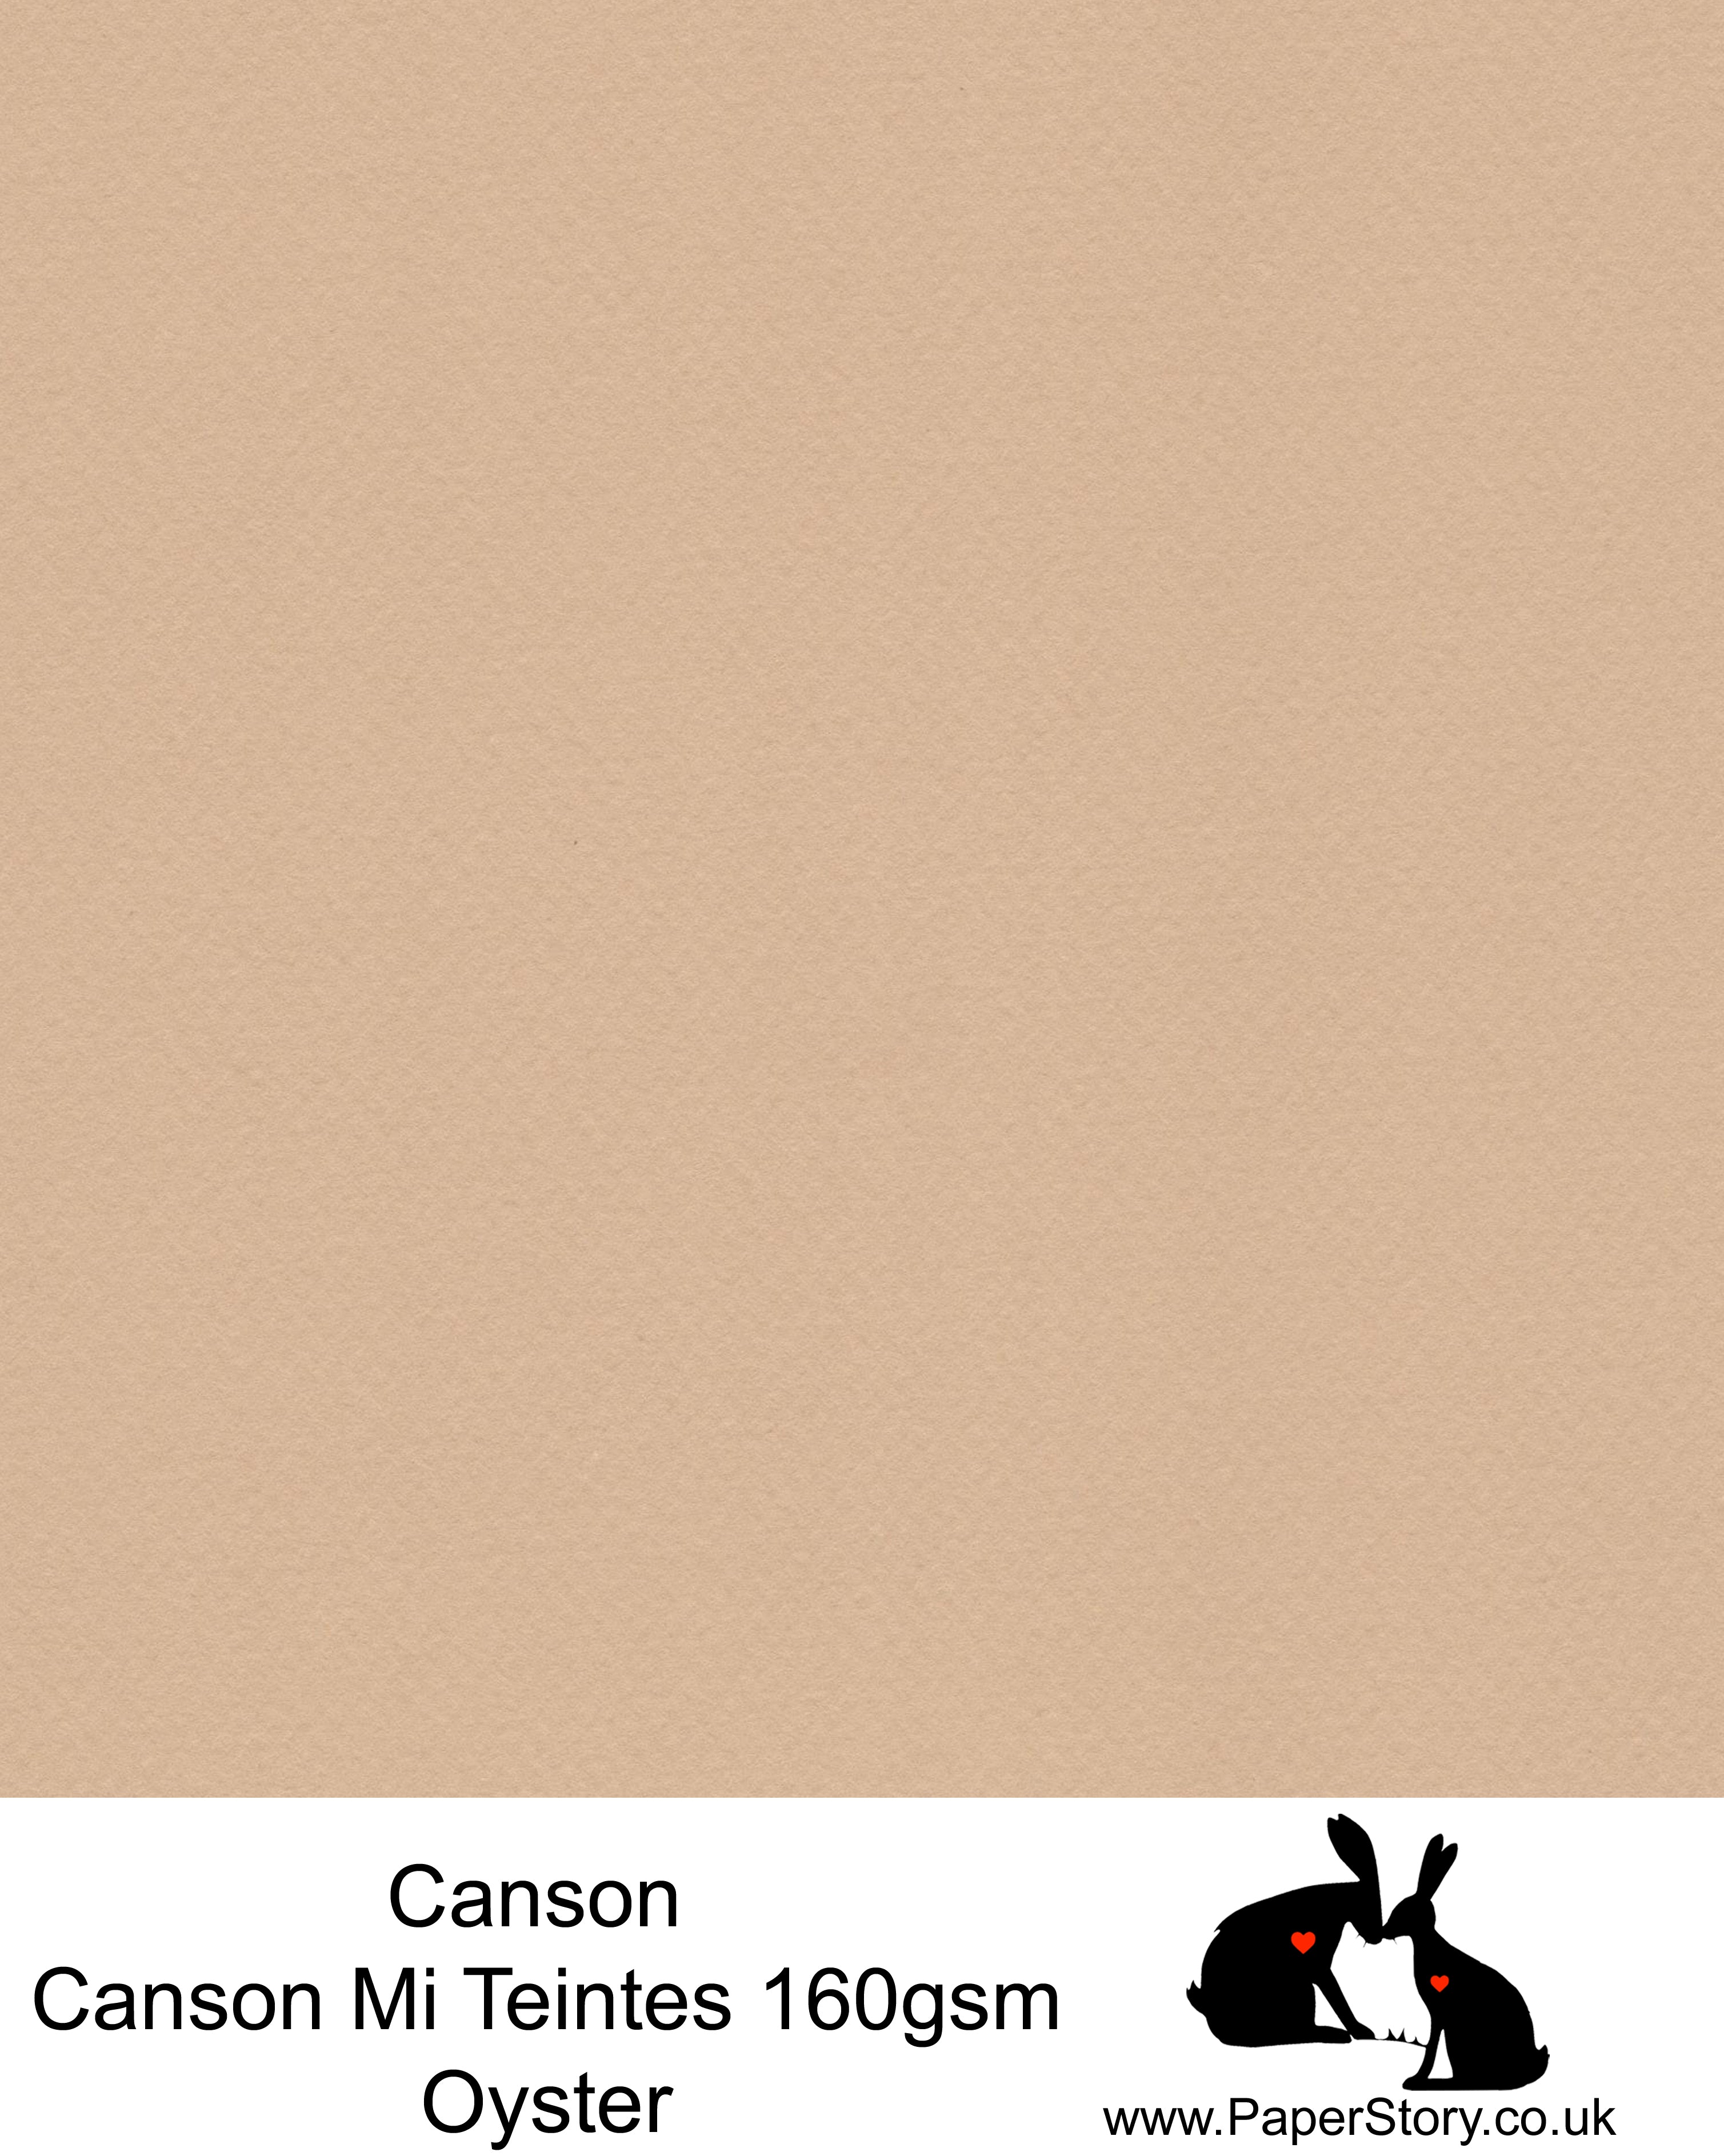 Canson Mi Teintes acid free, Oyster warm beige, hammered texture honeycomb surface paper 160 gsm. This is a popular and classic paper for all artists especially well respected for Pastel  and Papercutting made famous by Paper Panda. This paper has a honeycombed finish one side and fine grain the other. An authentic art paper, acid free with a  very high 50% cotton content. Canson Mi-Teintes complies with the ISO 9706 standard on permanence, a guarantee of excellent conservation  